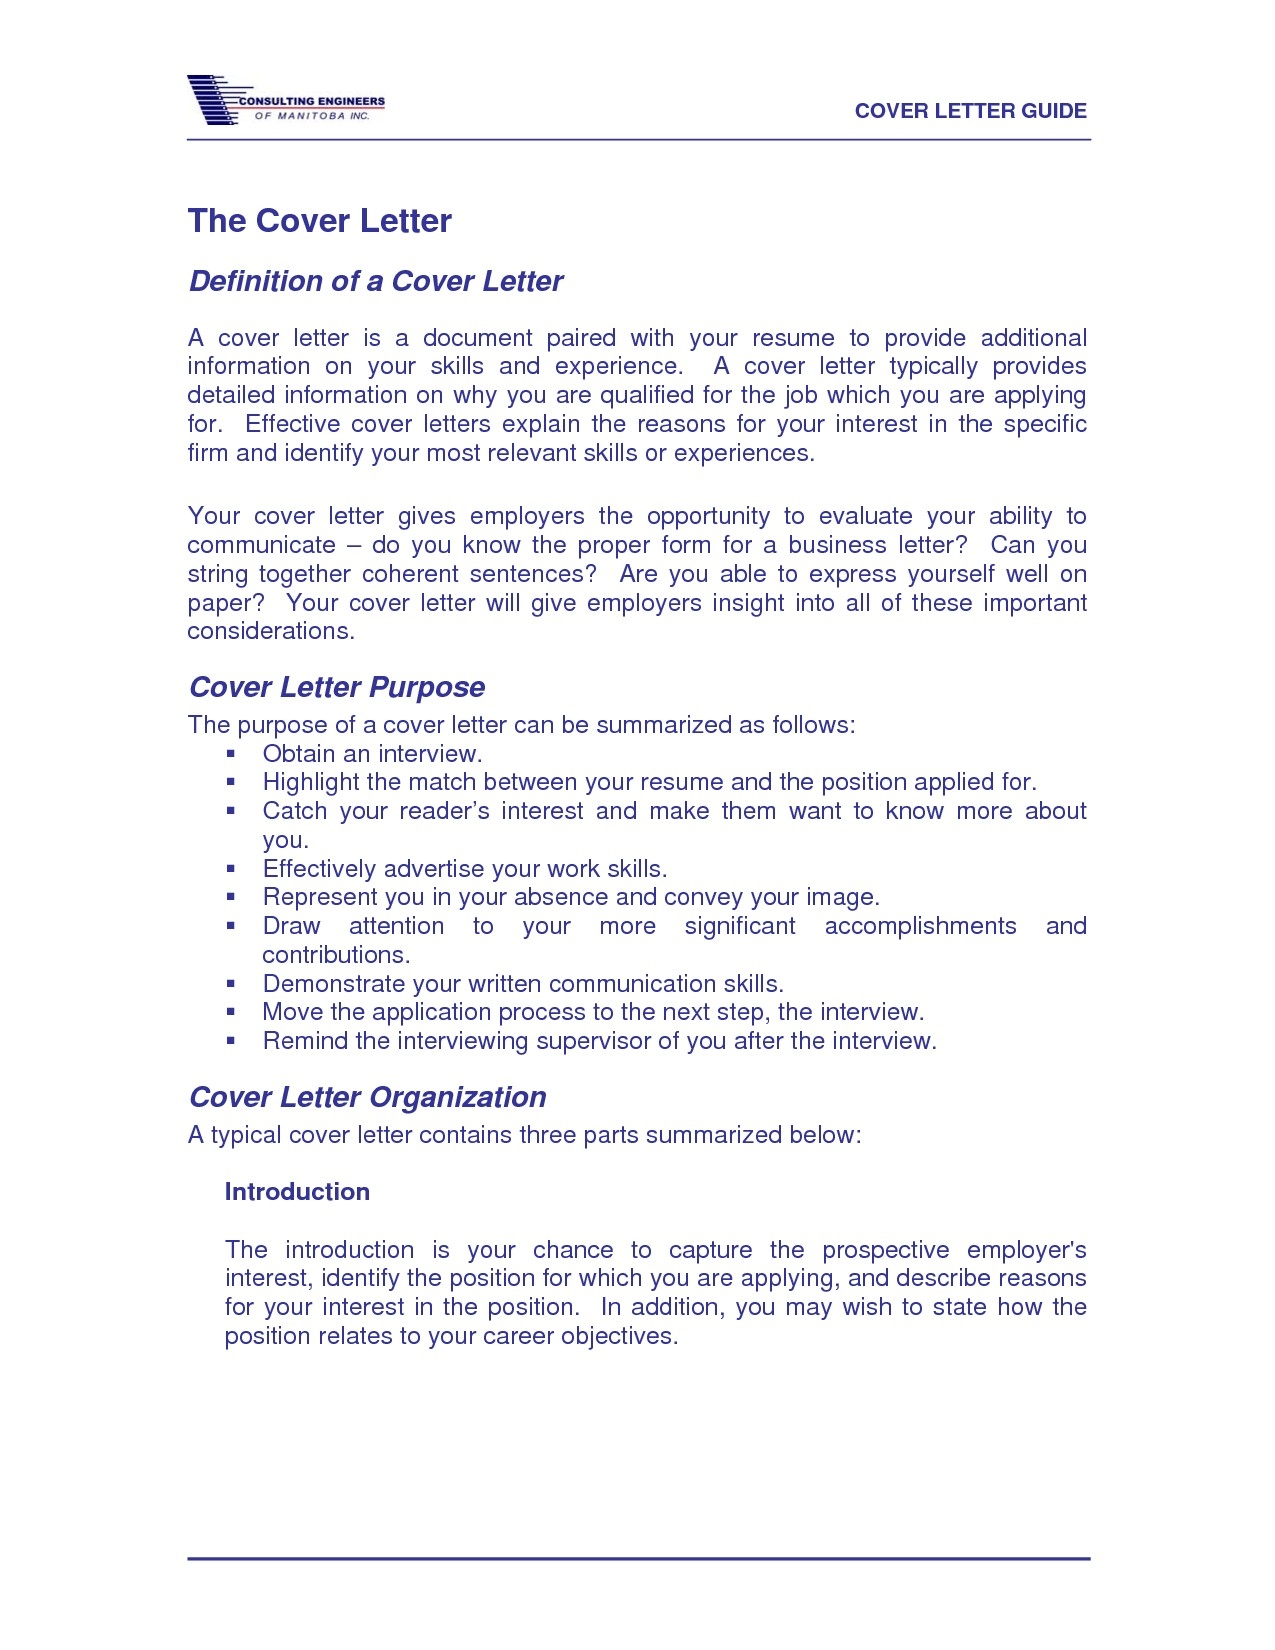 Define Cover Letter Yun56co Definition Of A Cover Letter | Best 